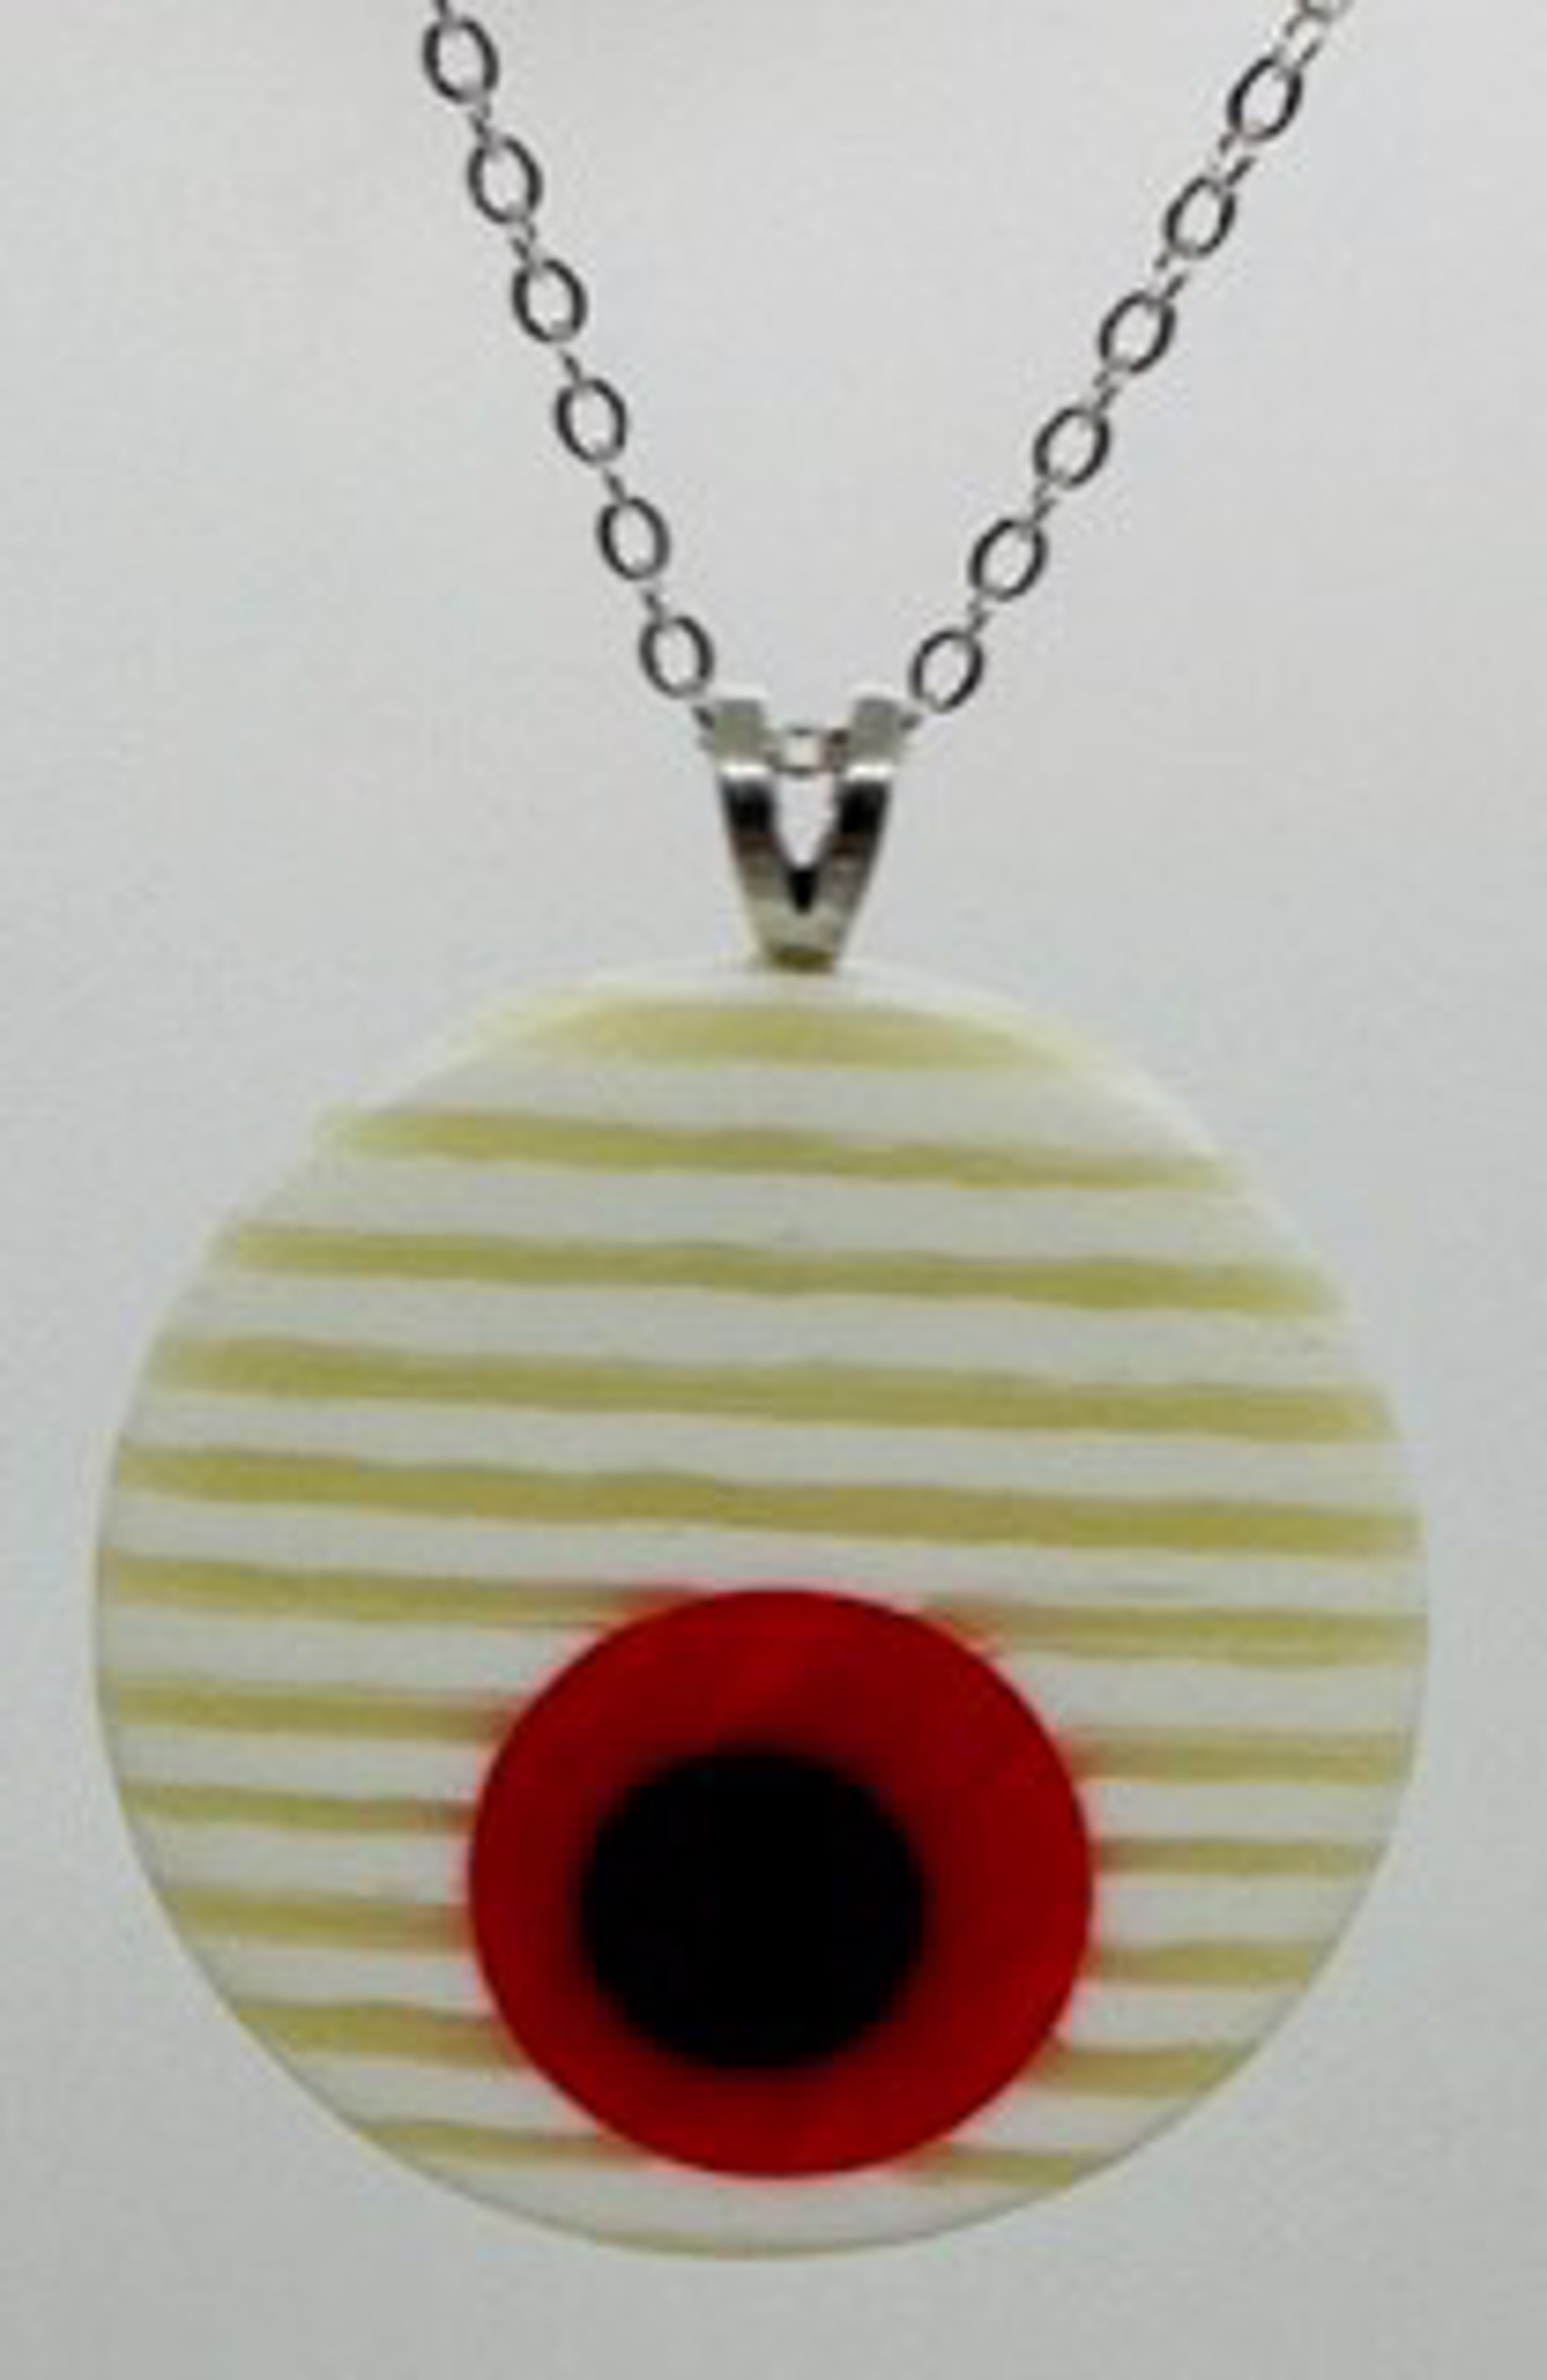 The Poppy Necklace by Chris Cox